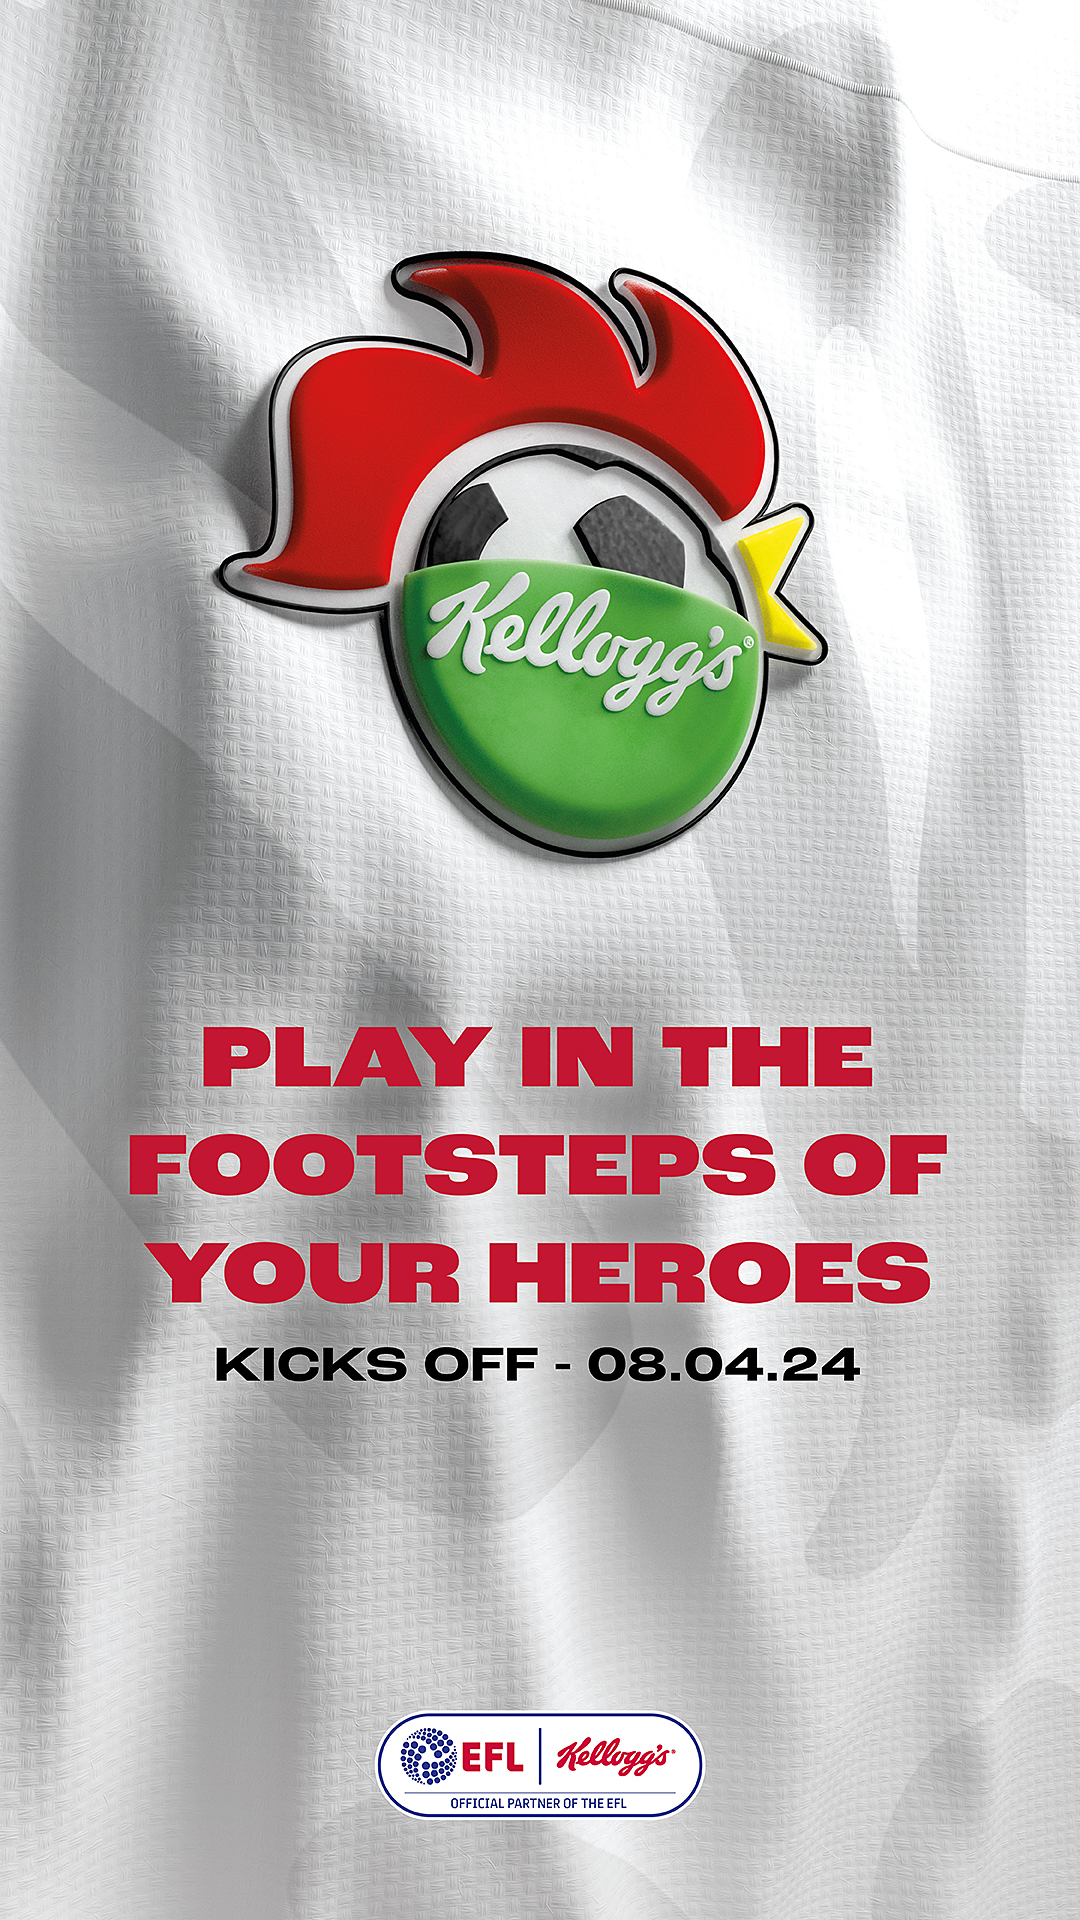 Kelloggs, Play in the footstep of your heroes. Kicks off 08.04.24